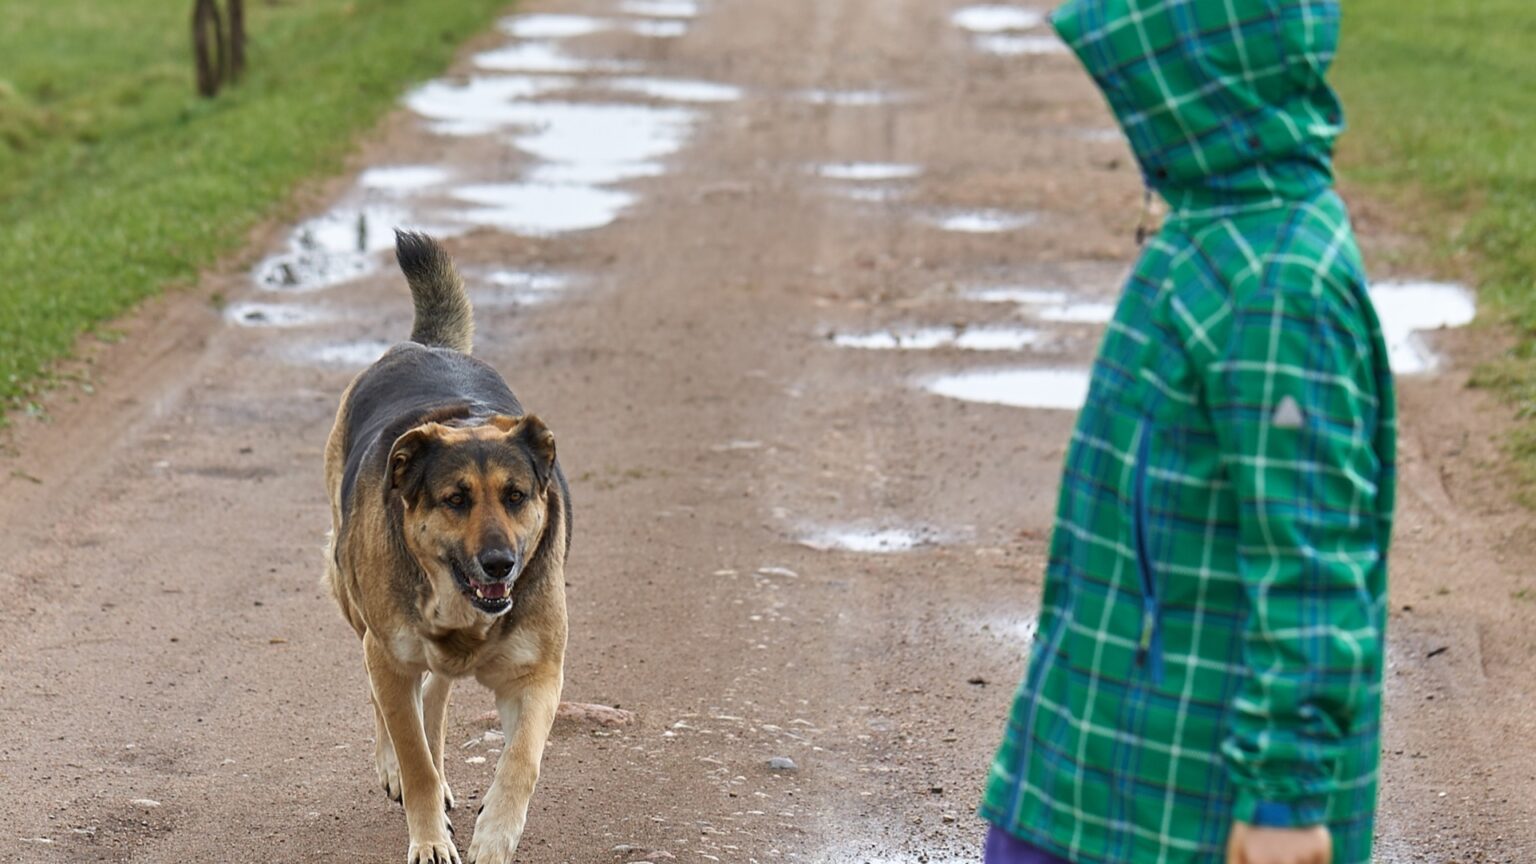 Urgent warning to parents as kids under 5 are most at risk being KILLED by dogs